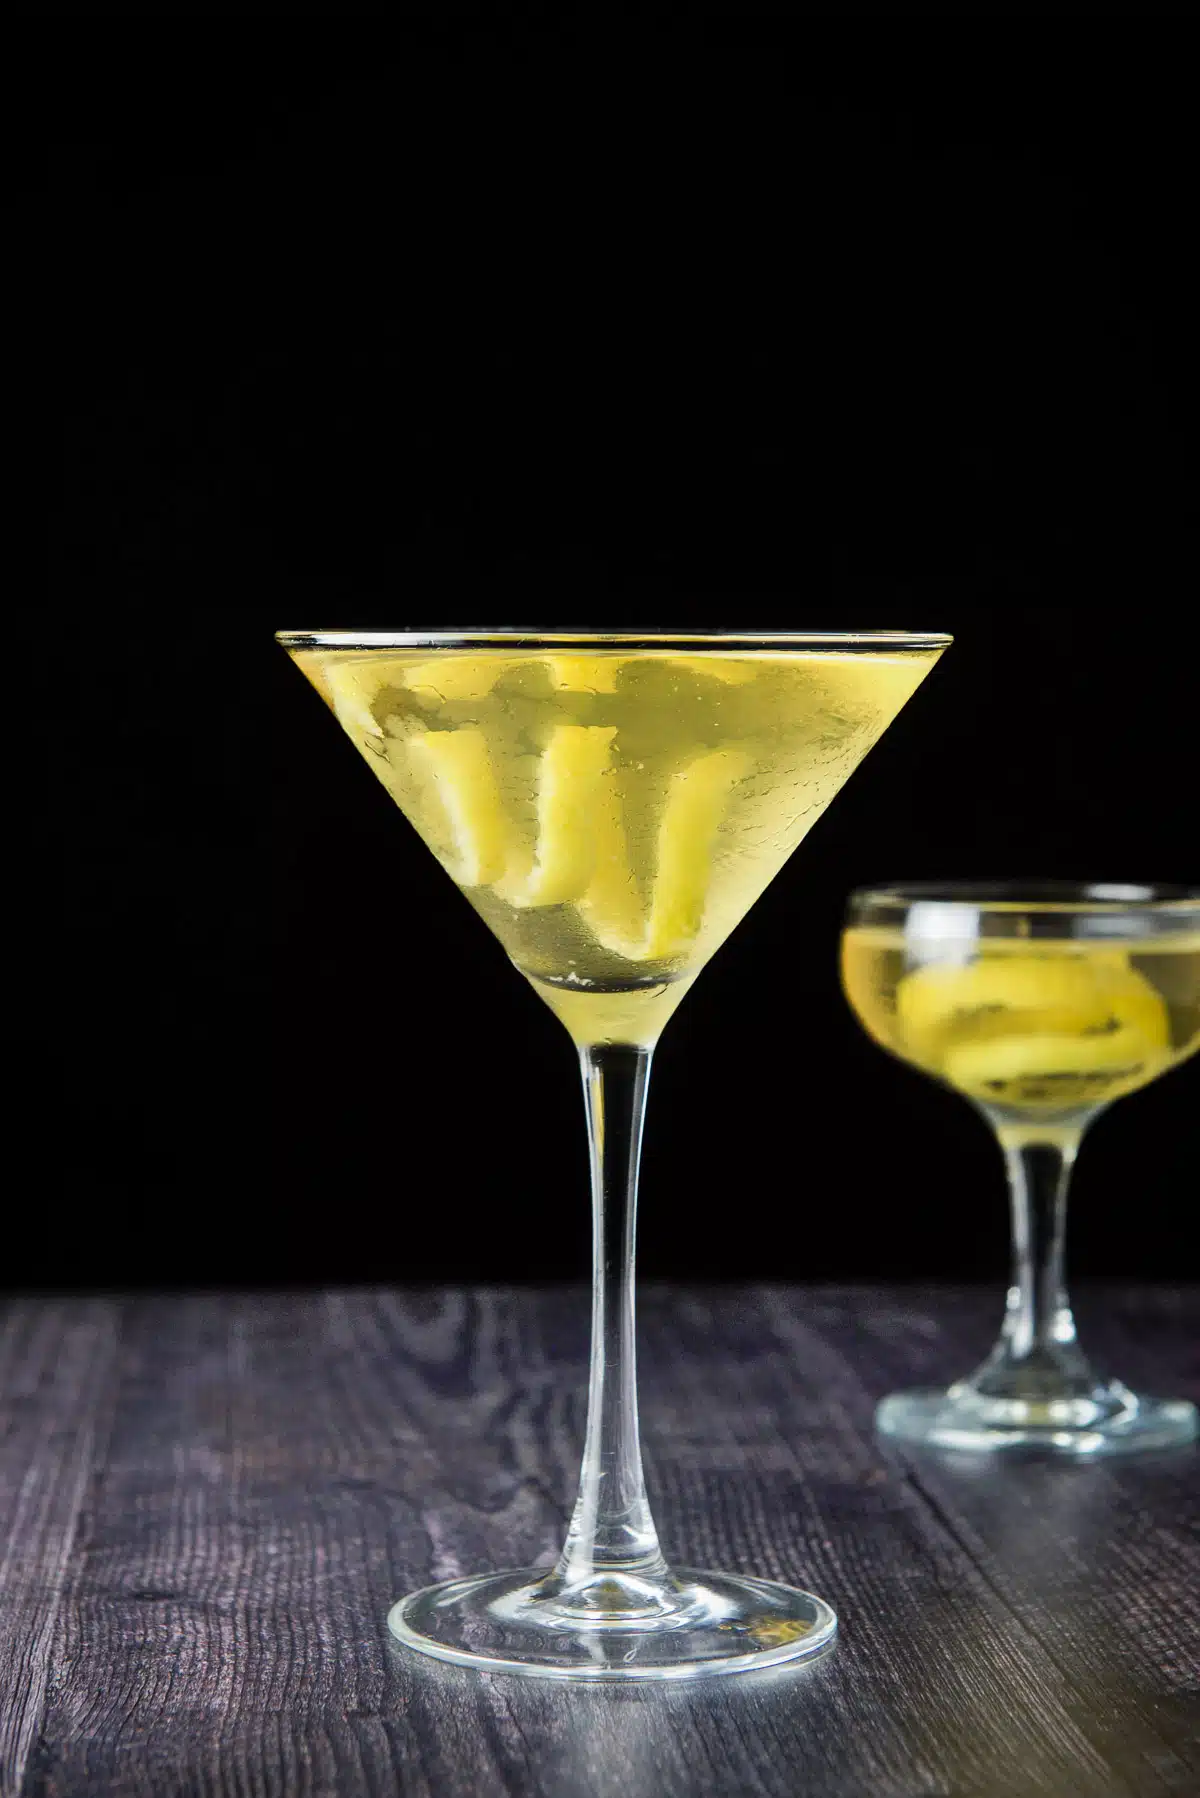 vertical view of the two martini glasses filled with the clear cocktail with lemon twists